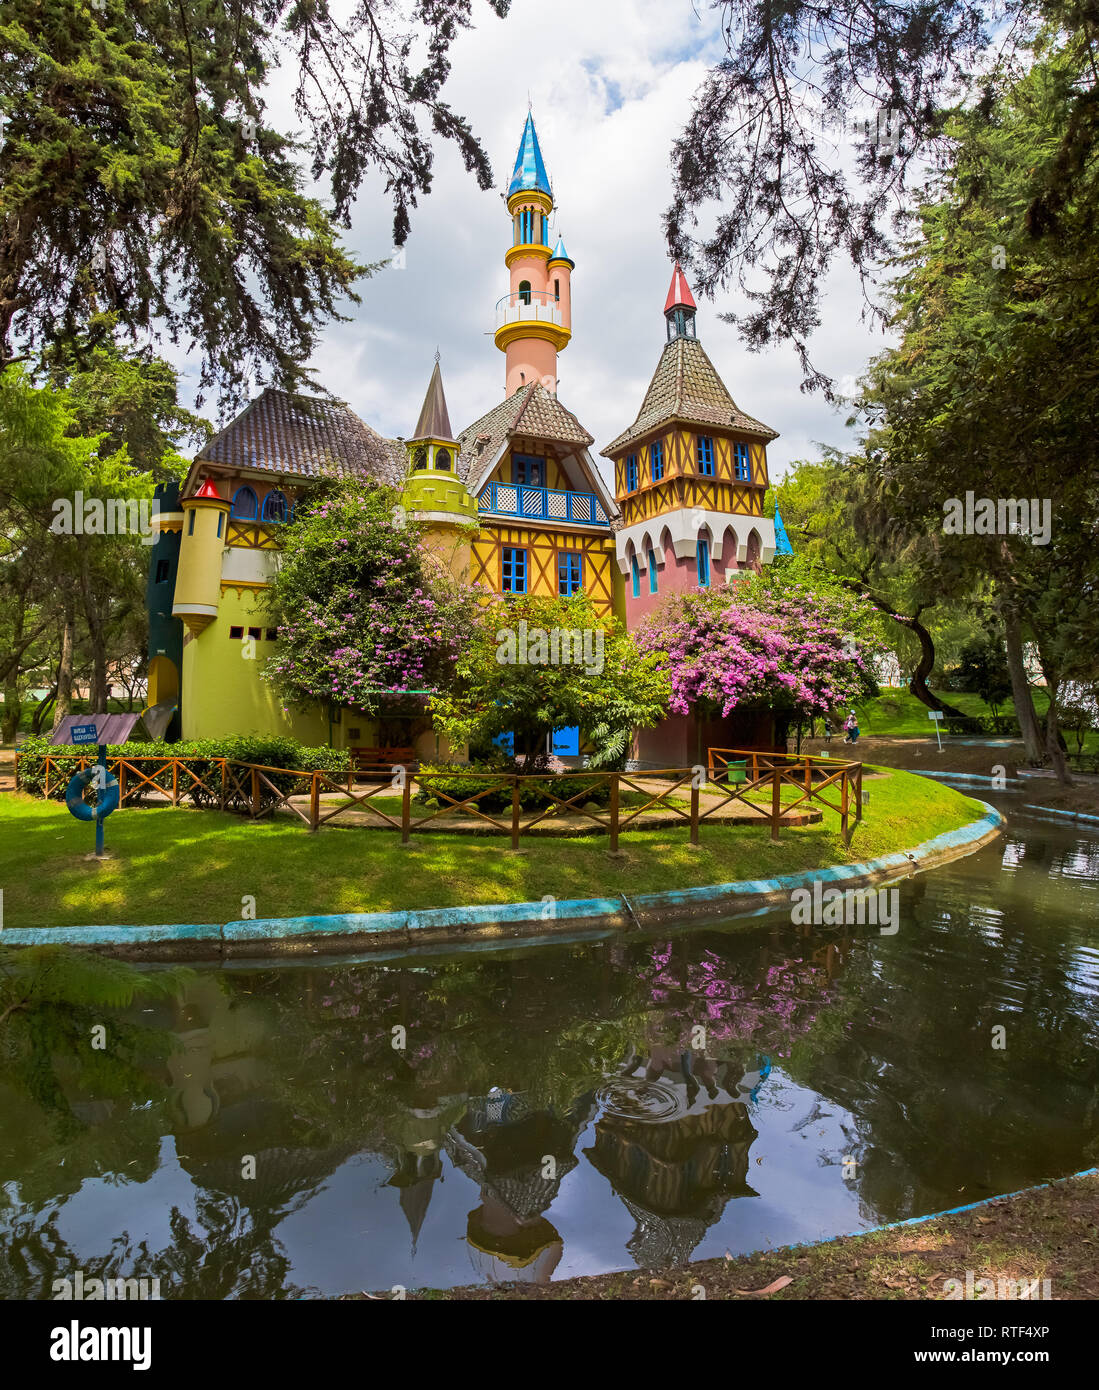 LOJA, ECUADOR, March 2018: Replica of a European medieval castle surrounded by trees, flowers and a water channel, inside the Jipiro recreational park Stock Photo